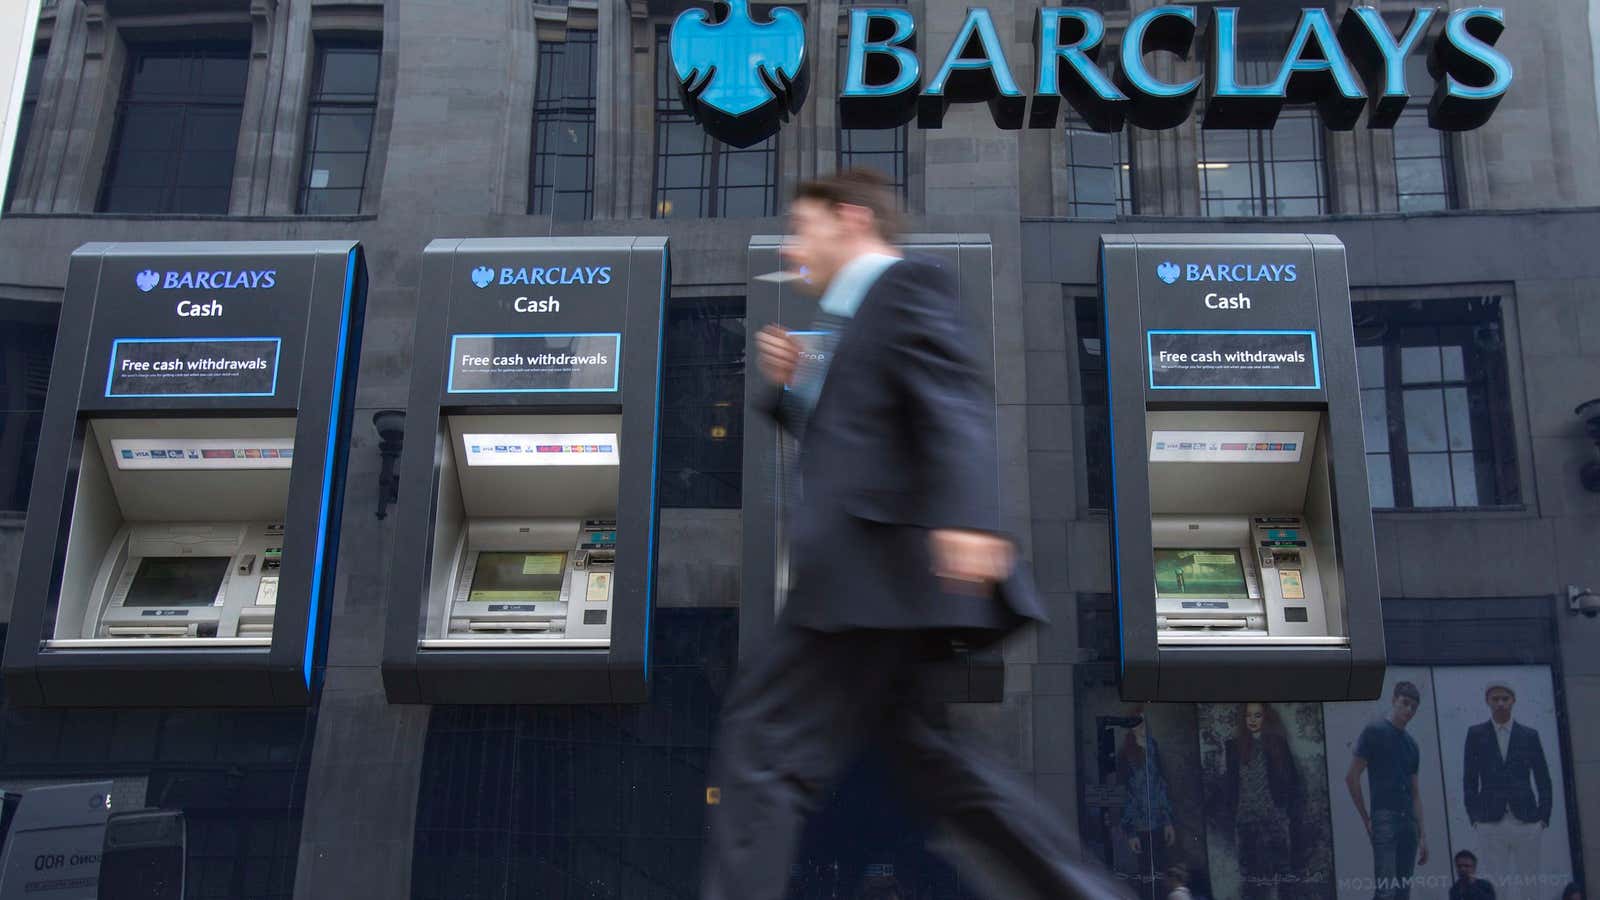 Barclays investment bank is due for an overhaul